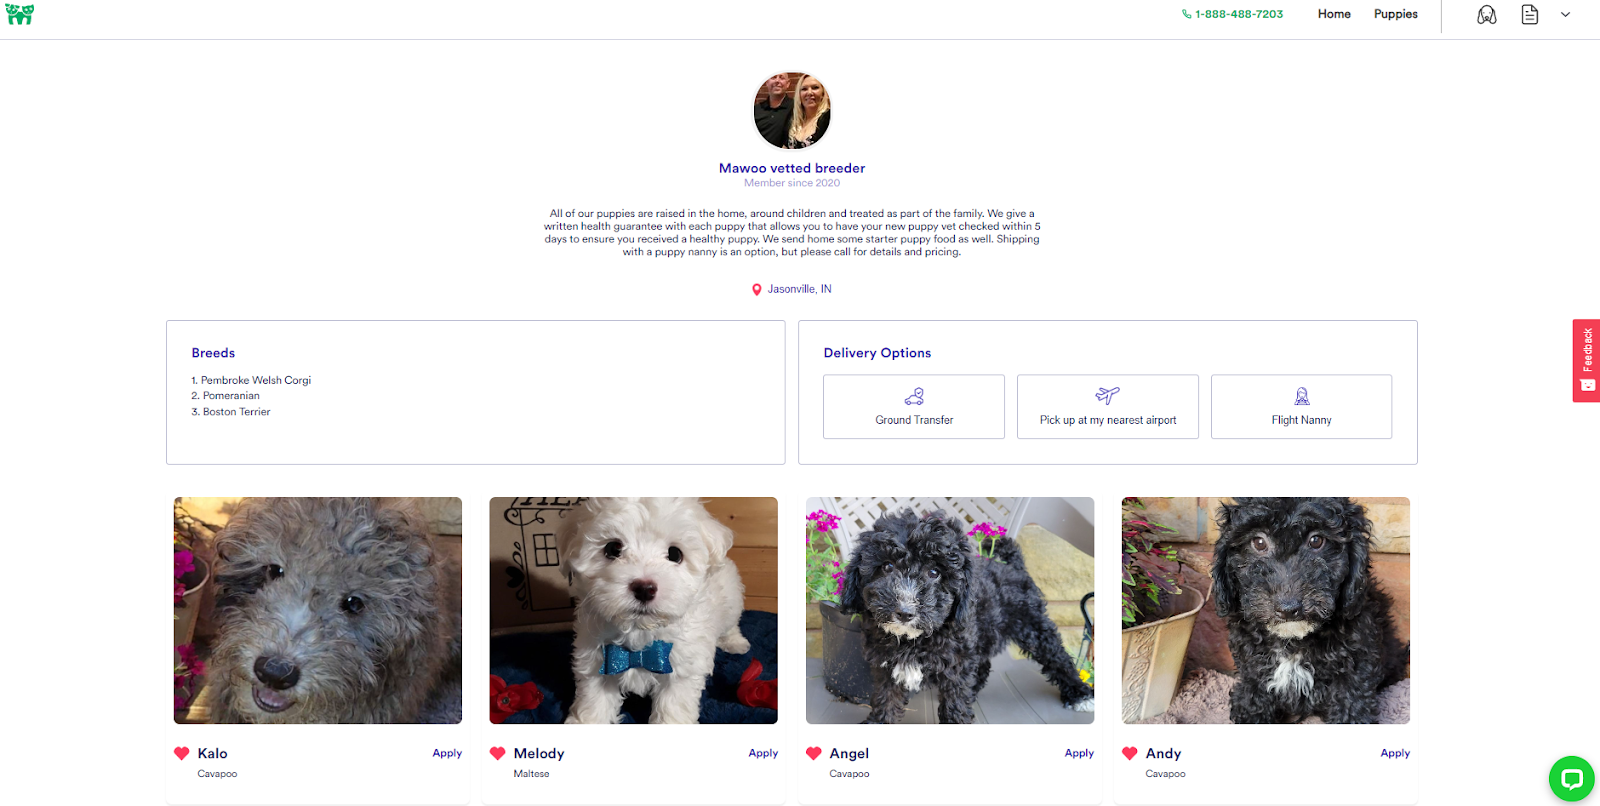 Mawoo Pets has simple breeder profile pages but they include all the info a puppy buyer needs to know.